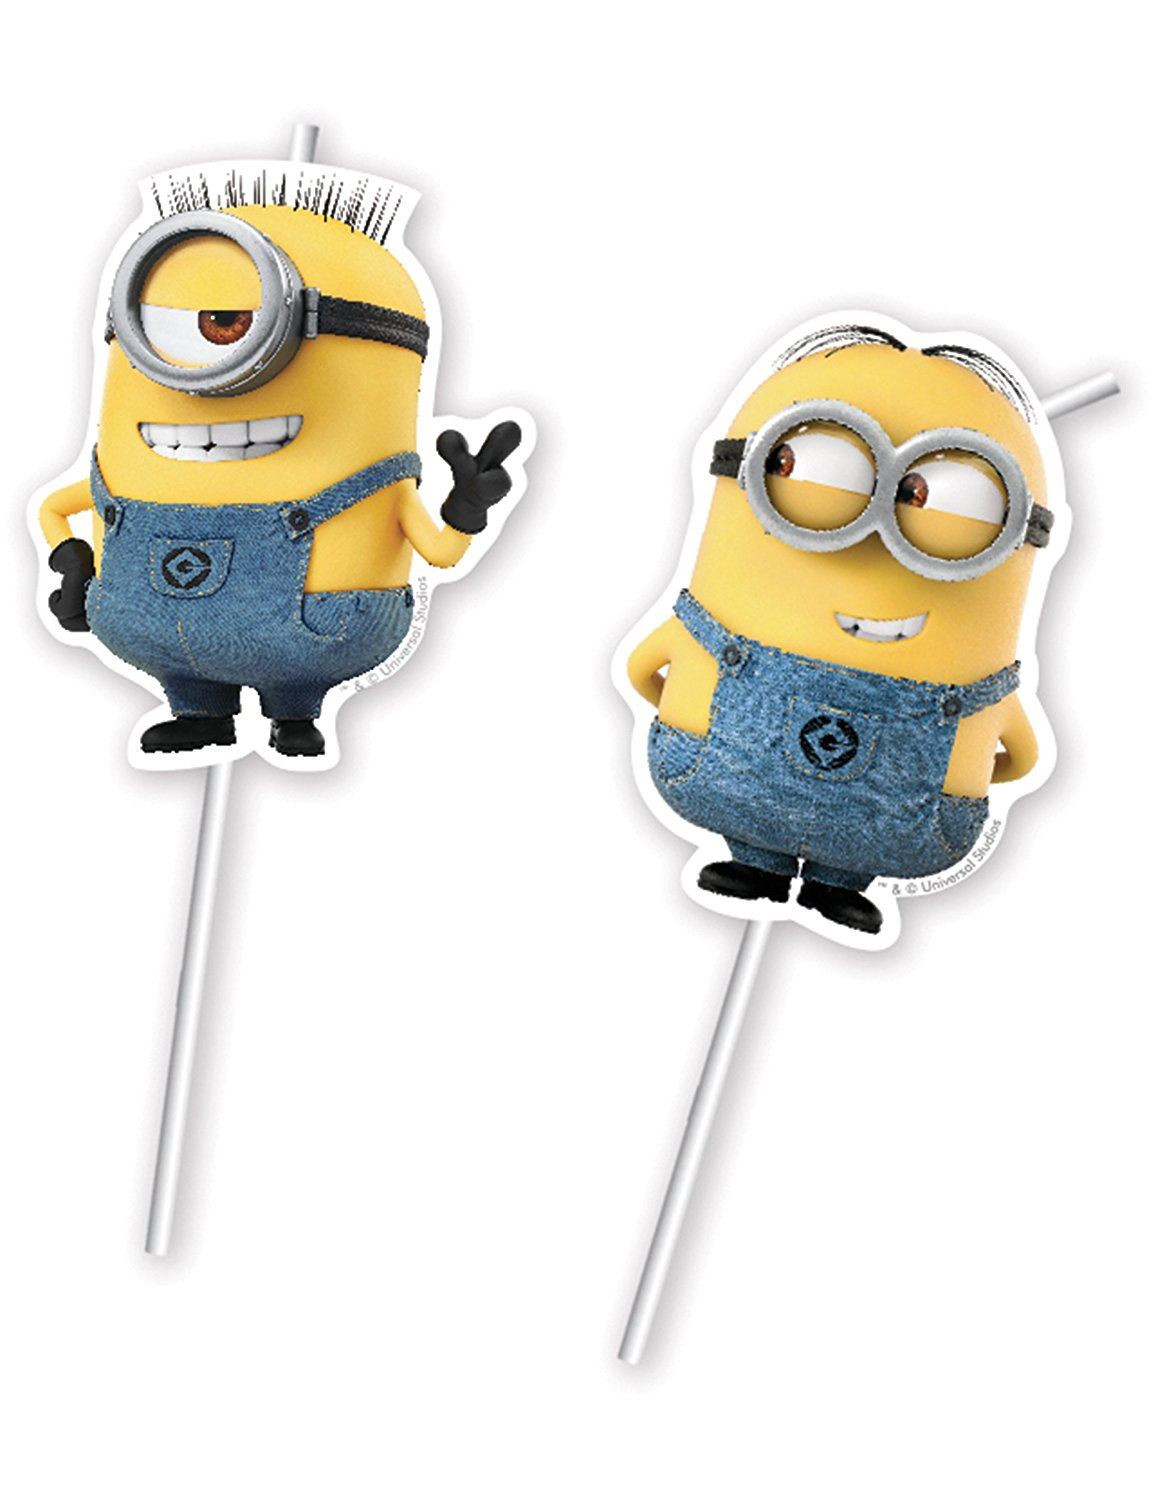 Despicable Me Birthday Party Supplies
 Minions Childrens Birthday Party Tableware Despicable Me